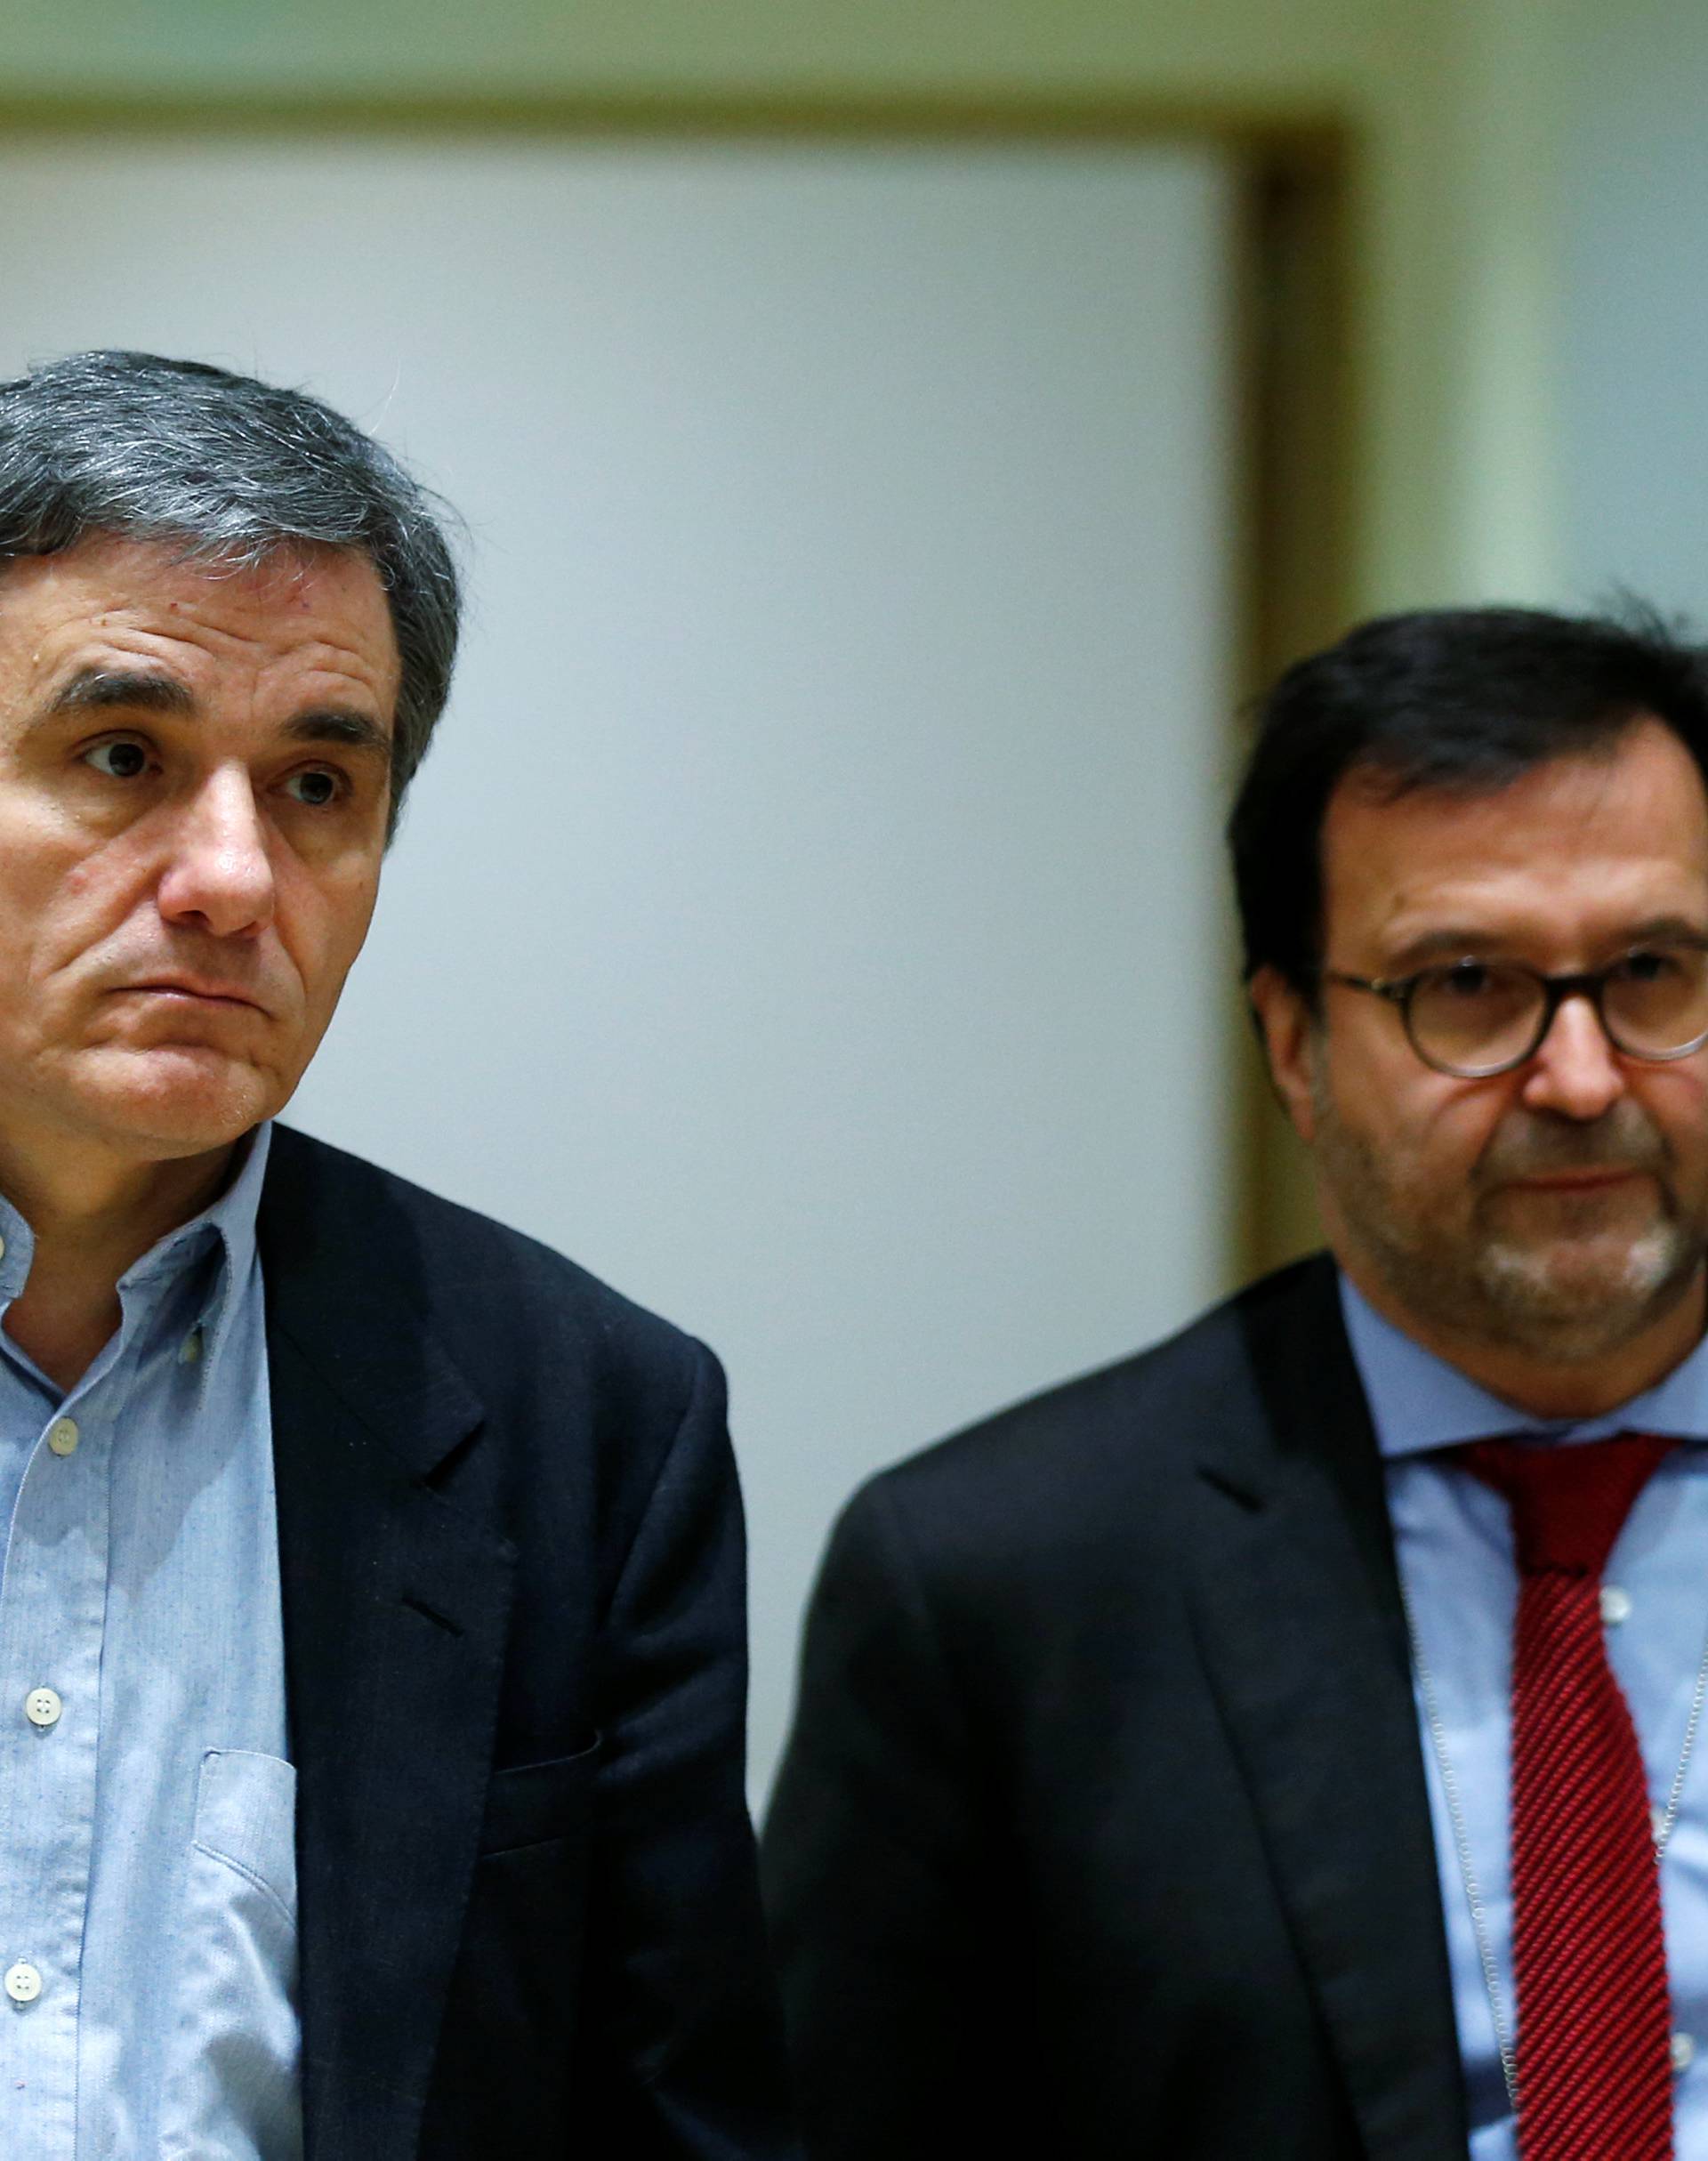 Greek Finance Minister Tsakalotos arrives at a eurozone finance ministers meeting in Brussels